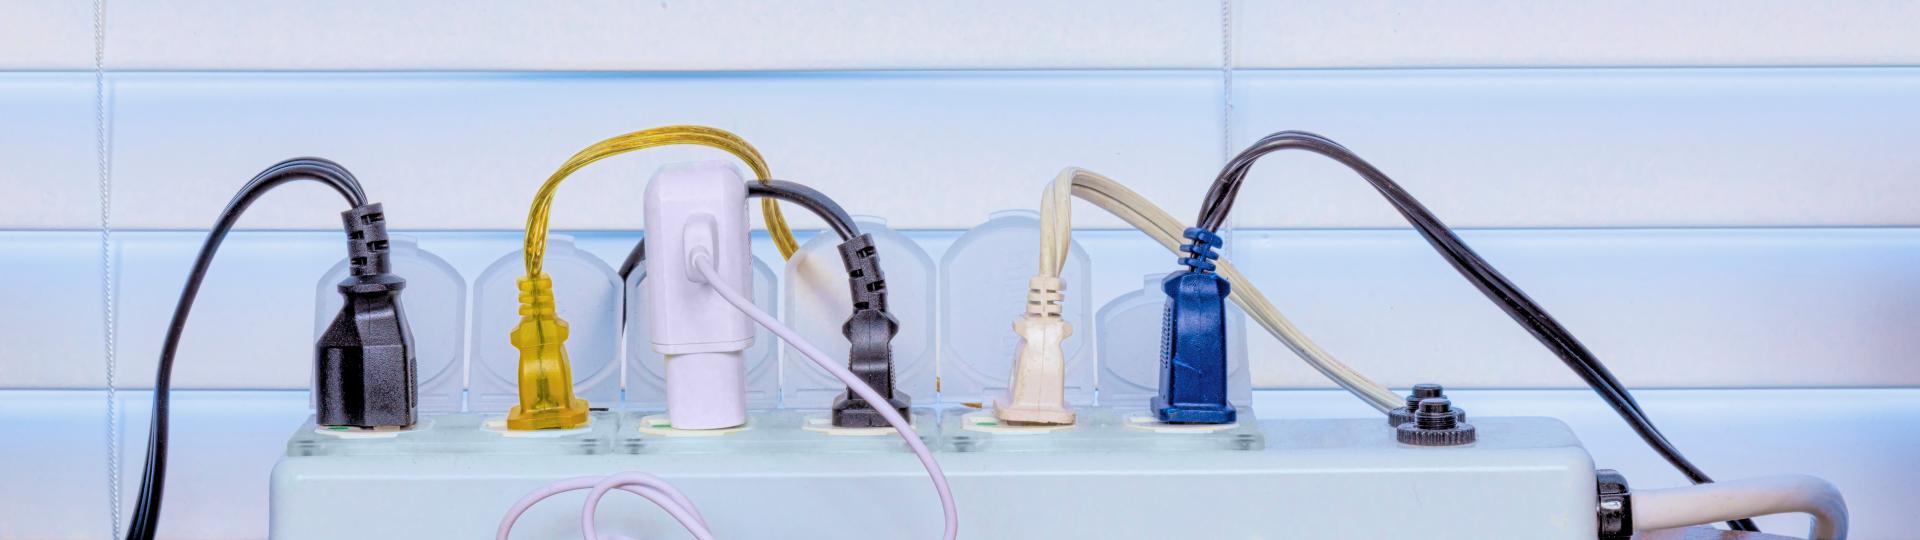 electrical cords plugged into an extension strip